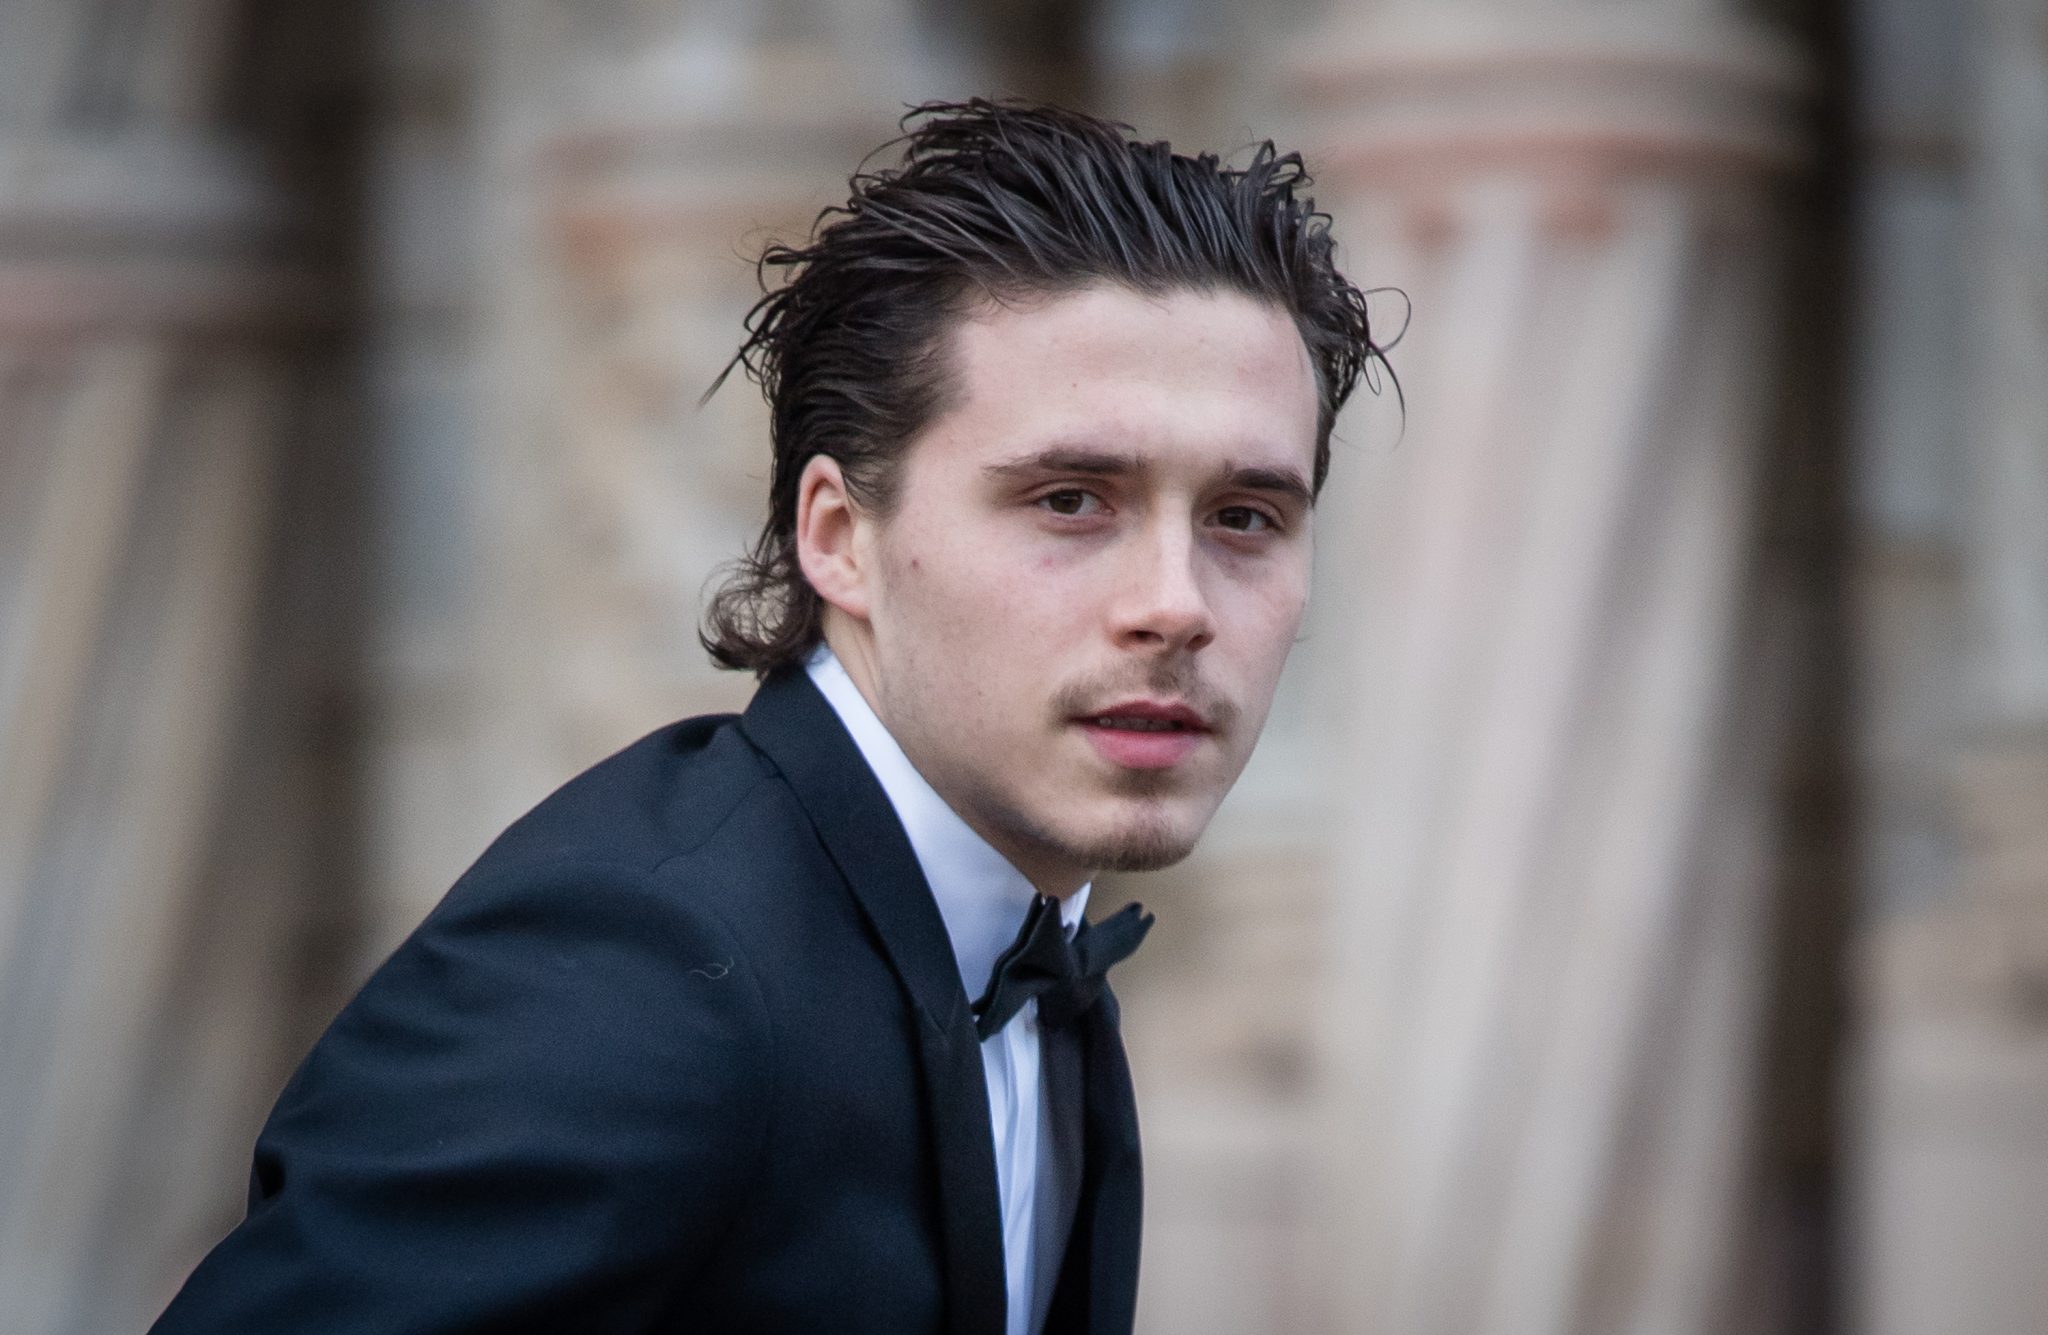 Sources say Brooklyn Beckham has a new girlfriend, actress Phoebe Torrance